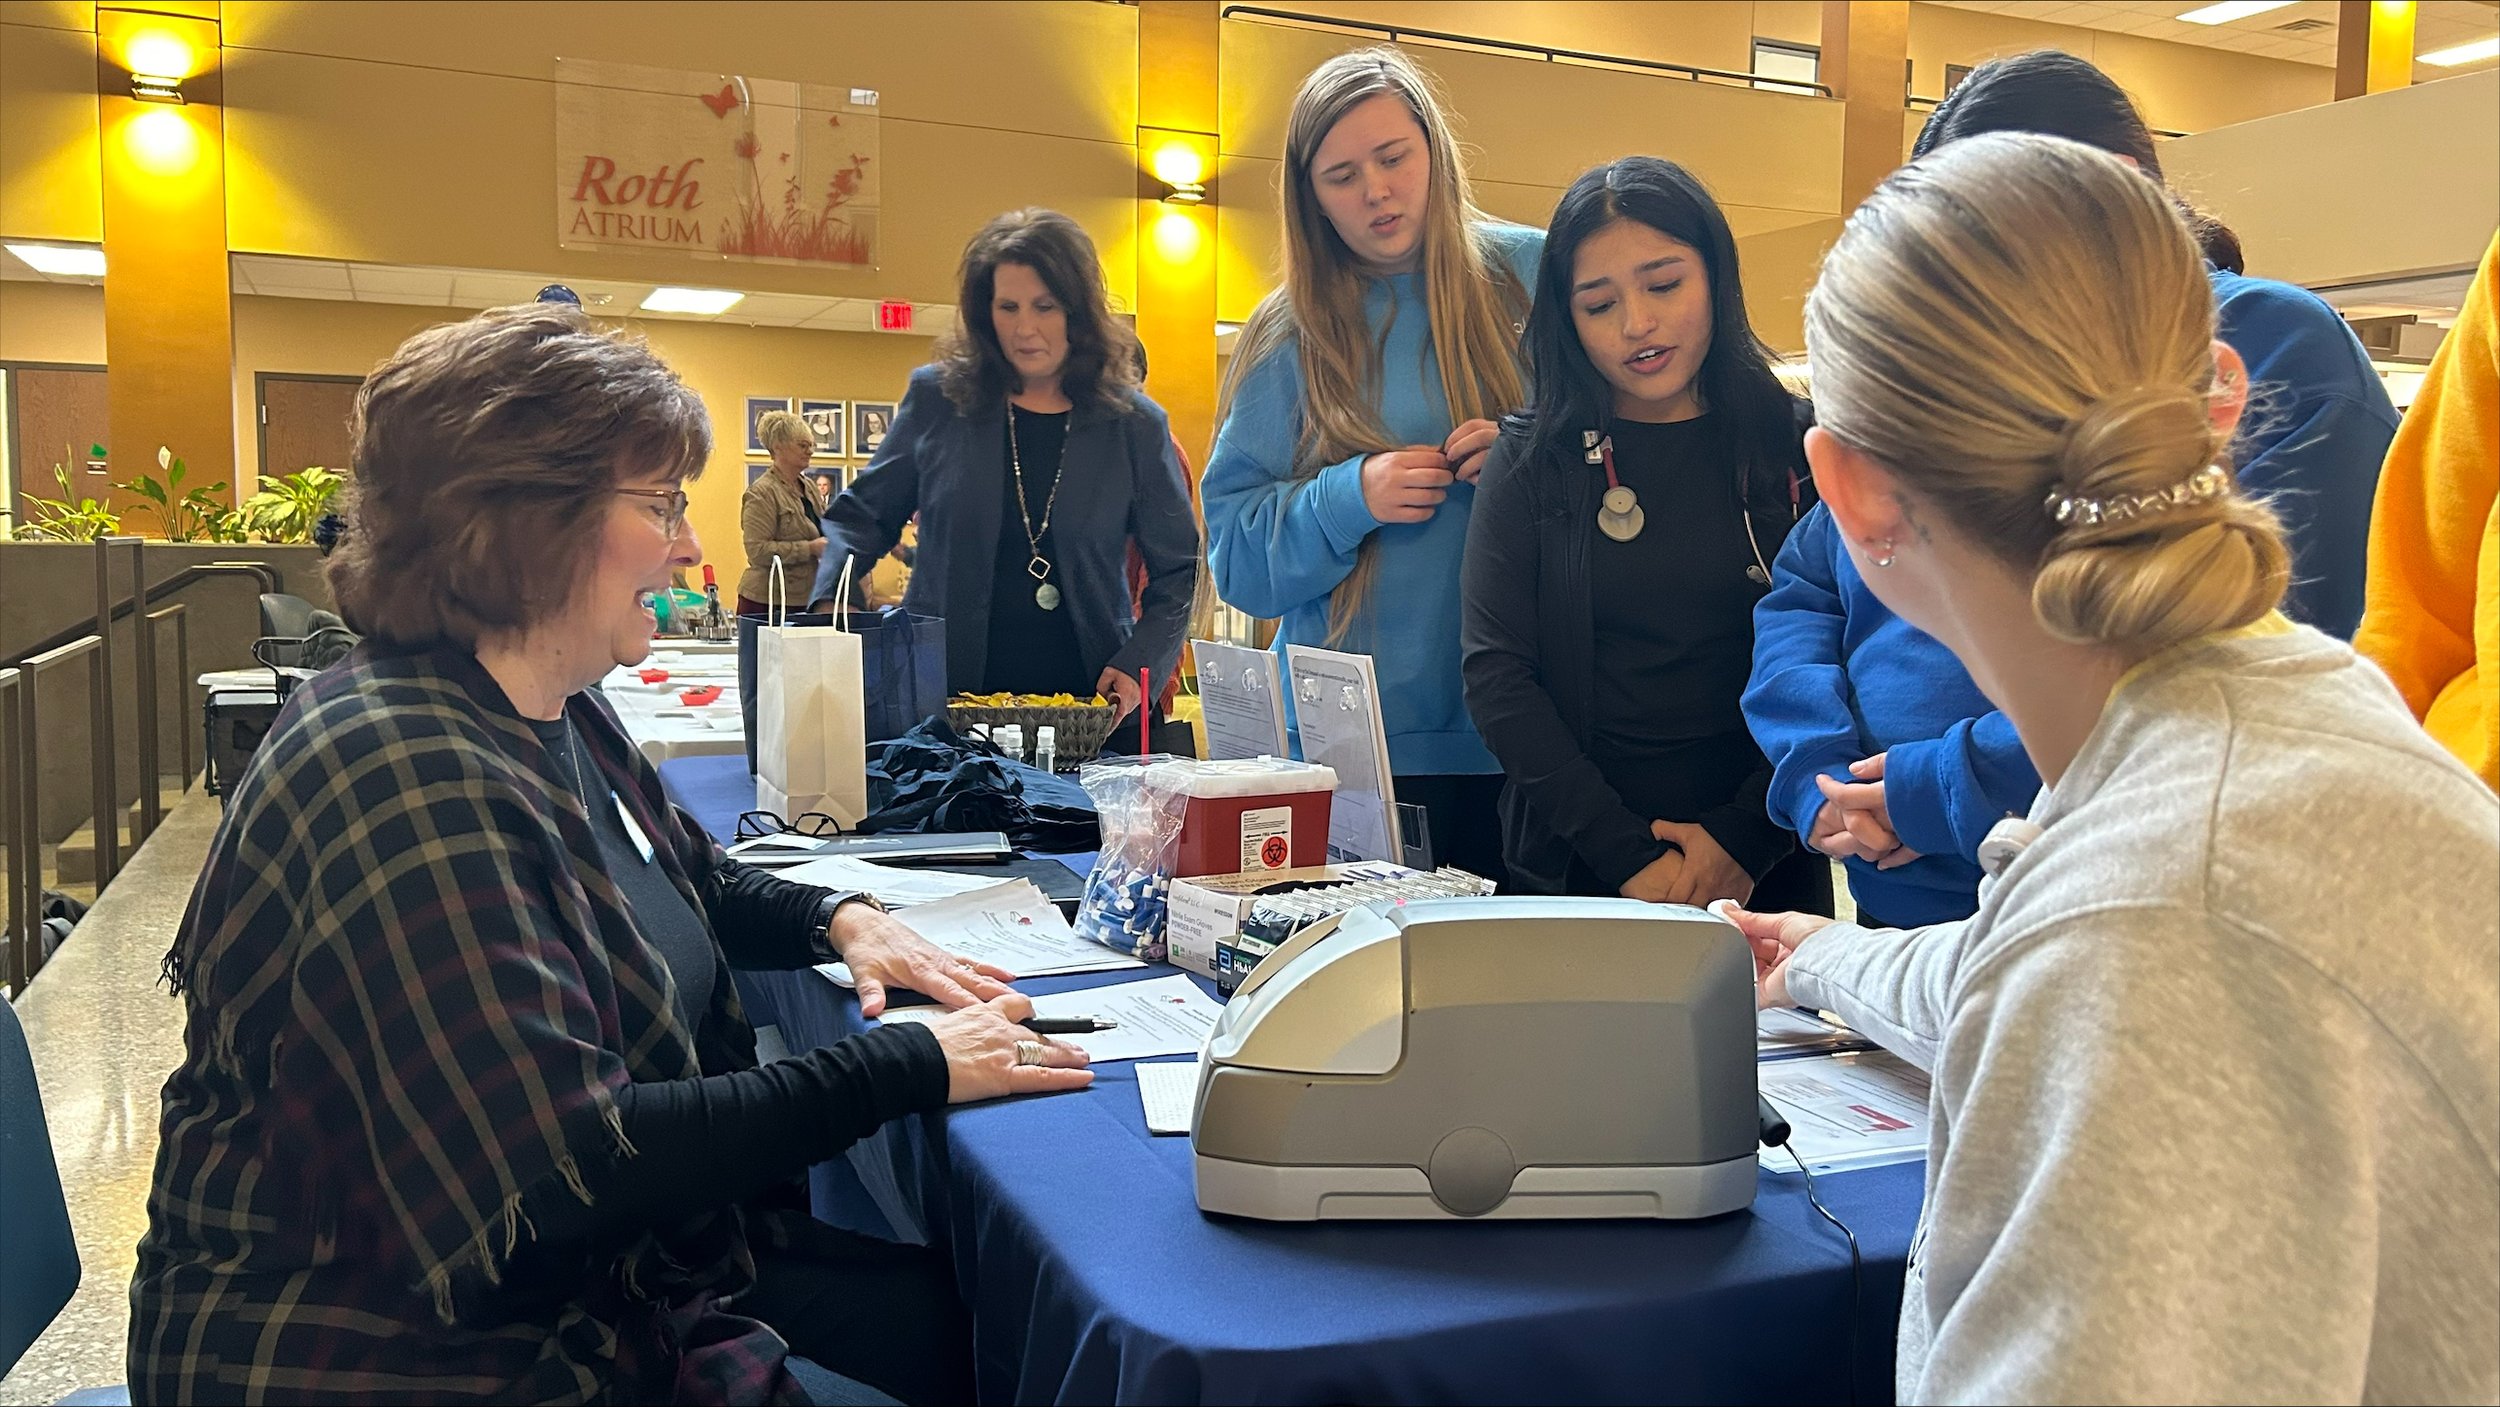  BCU students crowd around the IBC Innovative Business Consultants booth, while Veronica Pitzl got the opportunity to test her HbA1C (Hemoglobin A1c) via a fingerstick, a frontline test for Diabetes.&nbsp;&nbsp; 